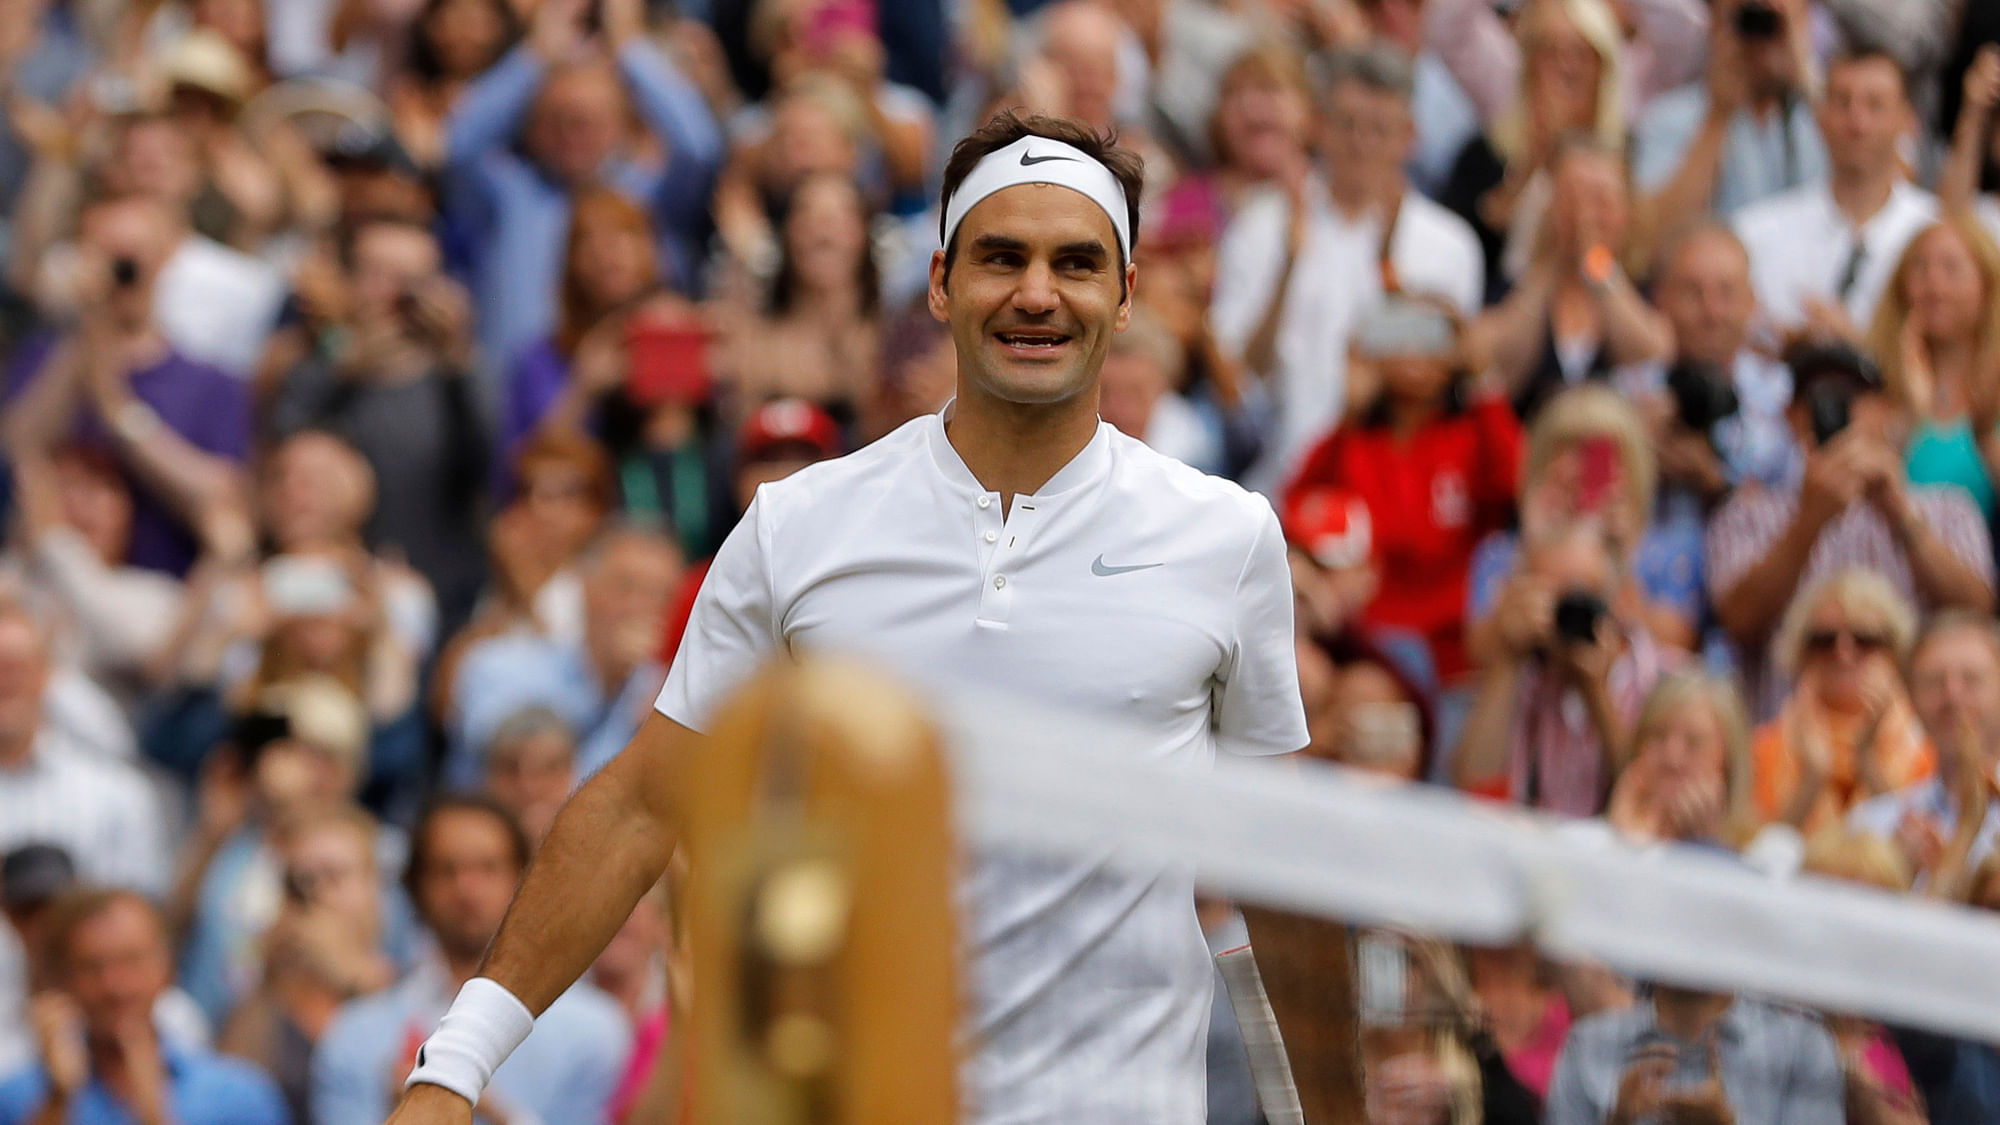 Roger Federer will be playing his record 11th Wimbledon final against Marin Cilic on Sunday.